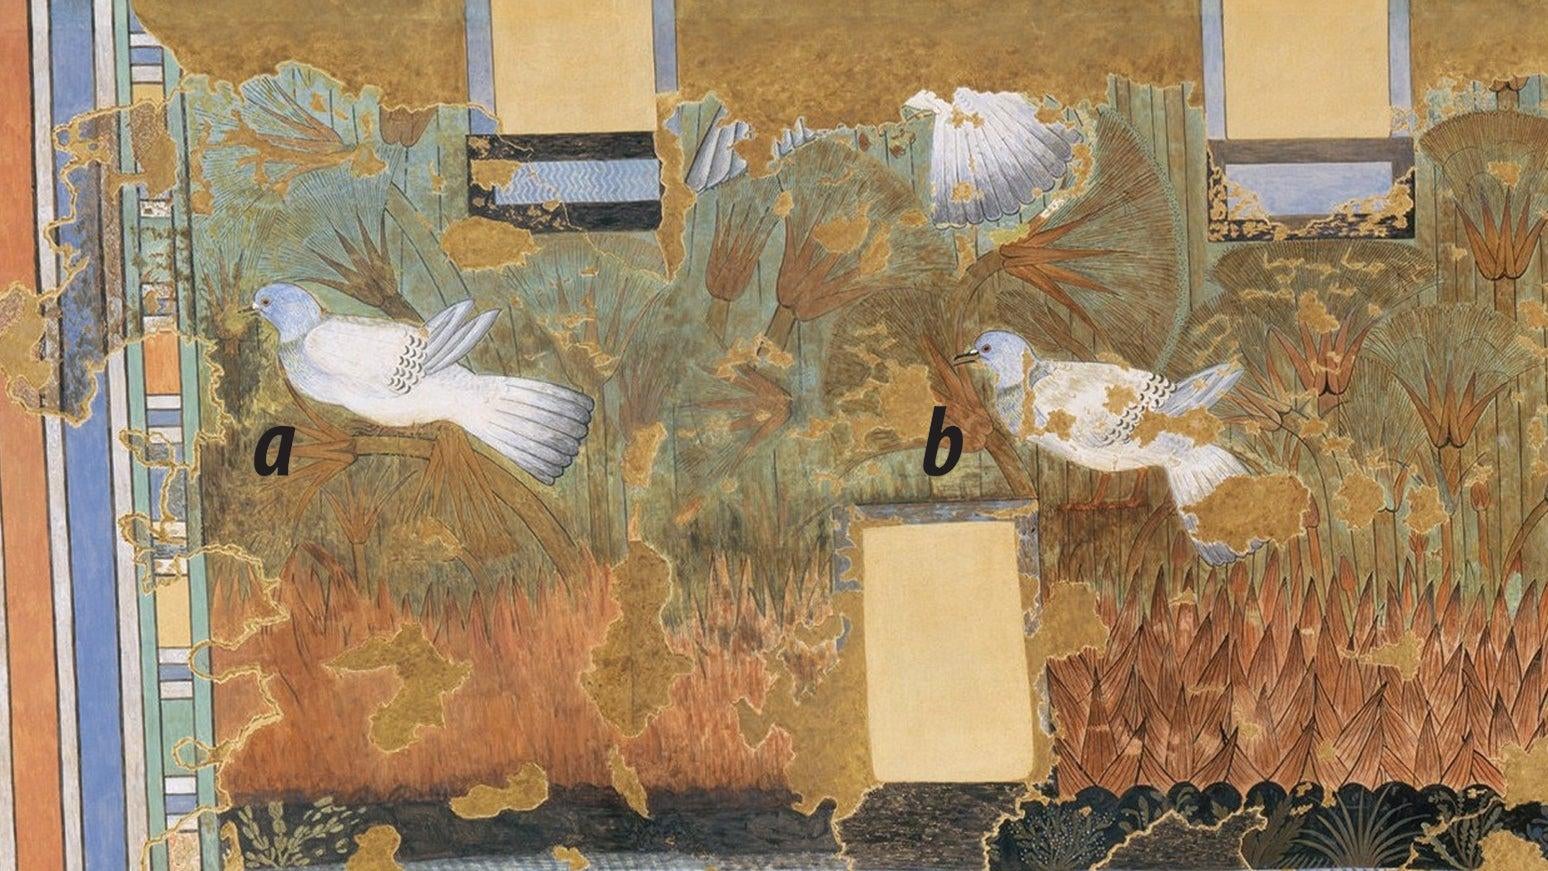 Ancient Egyptian Murals Show Lifelike Doves, Kingfishers, and Other Birds